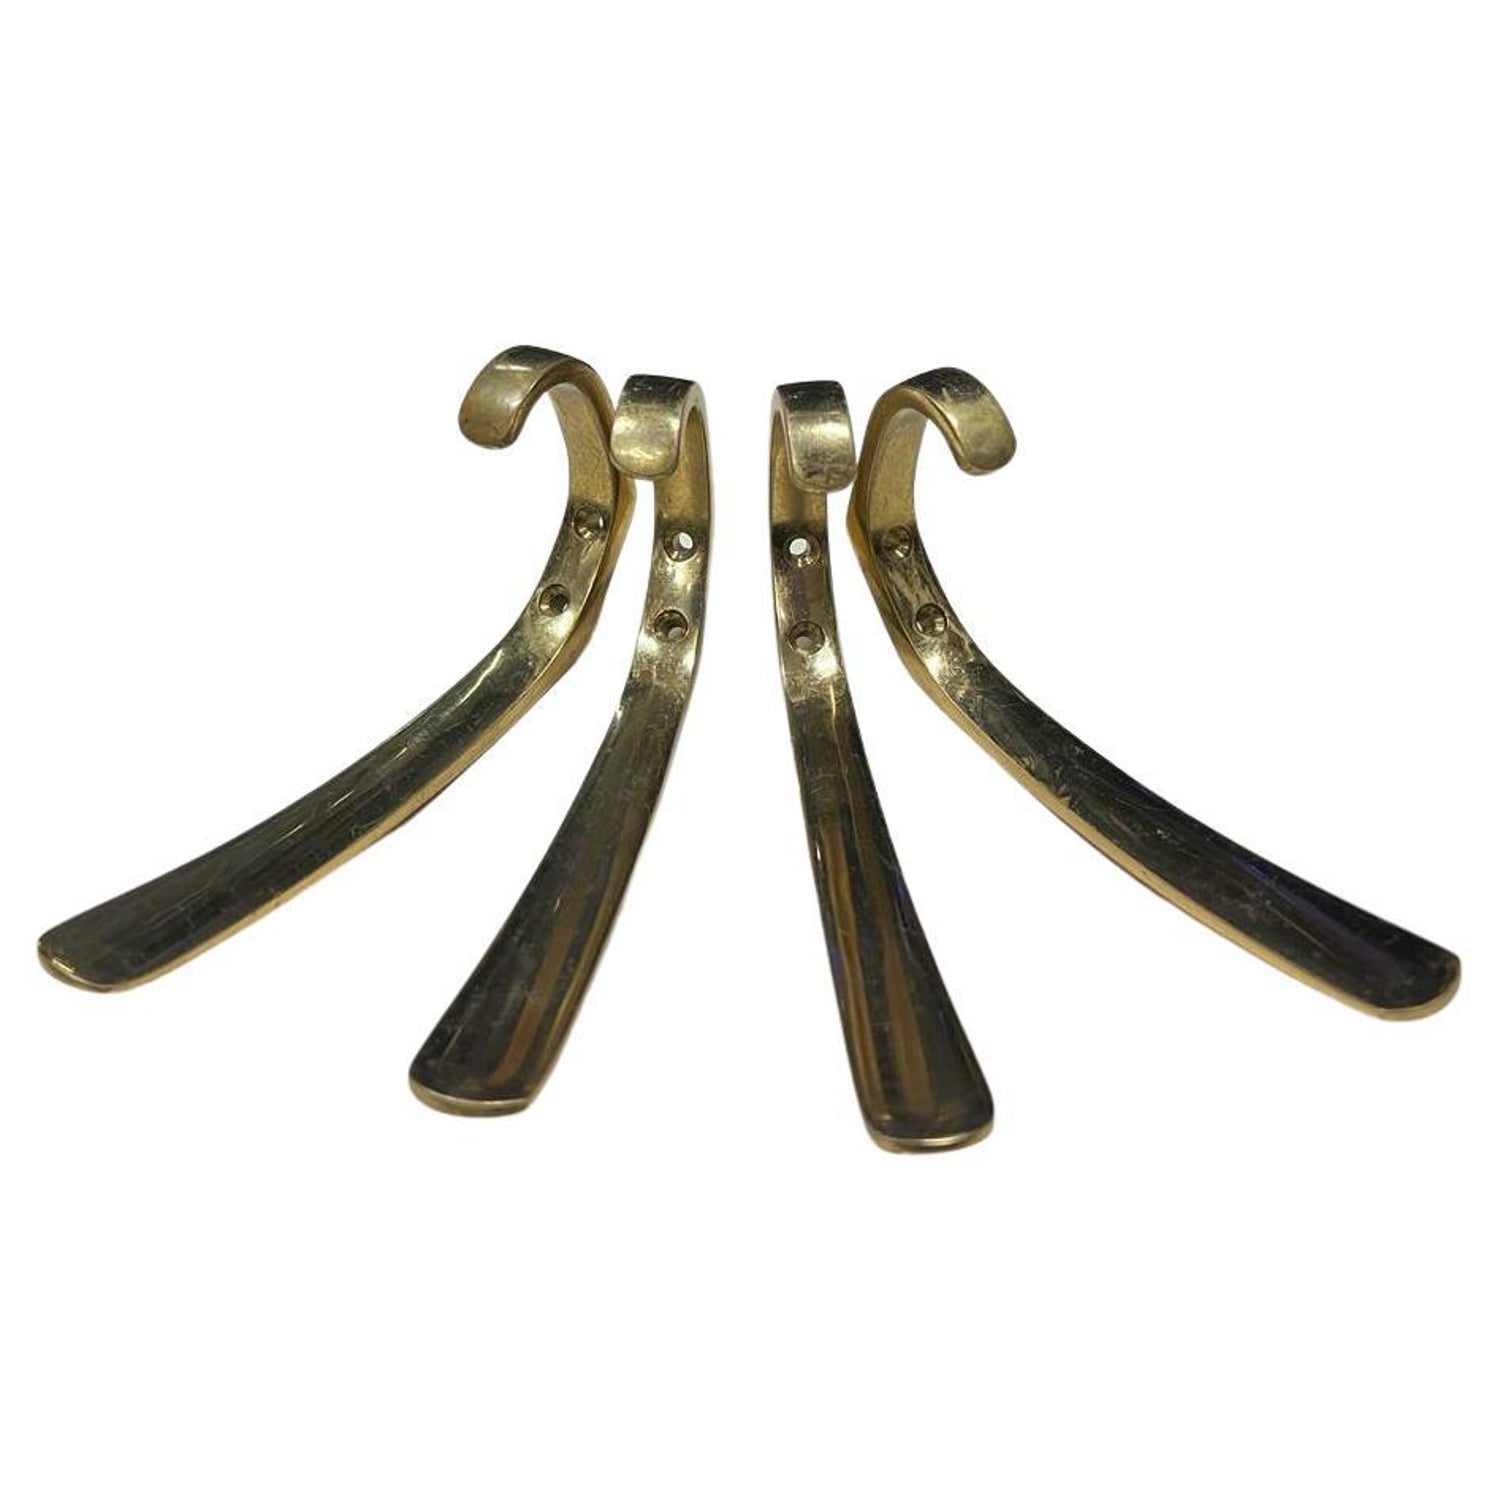 4 Wall Mounted Brass Coat Hooks by Hertha Baller, Austria, 1950s for sale  at Pamono